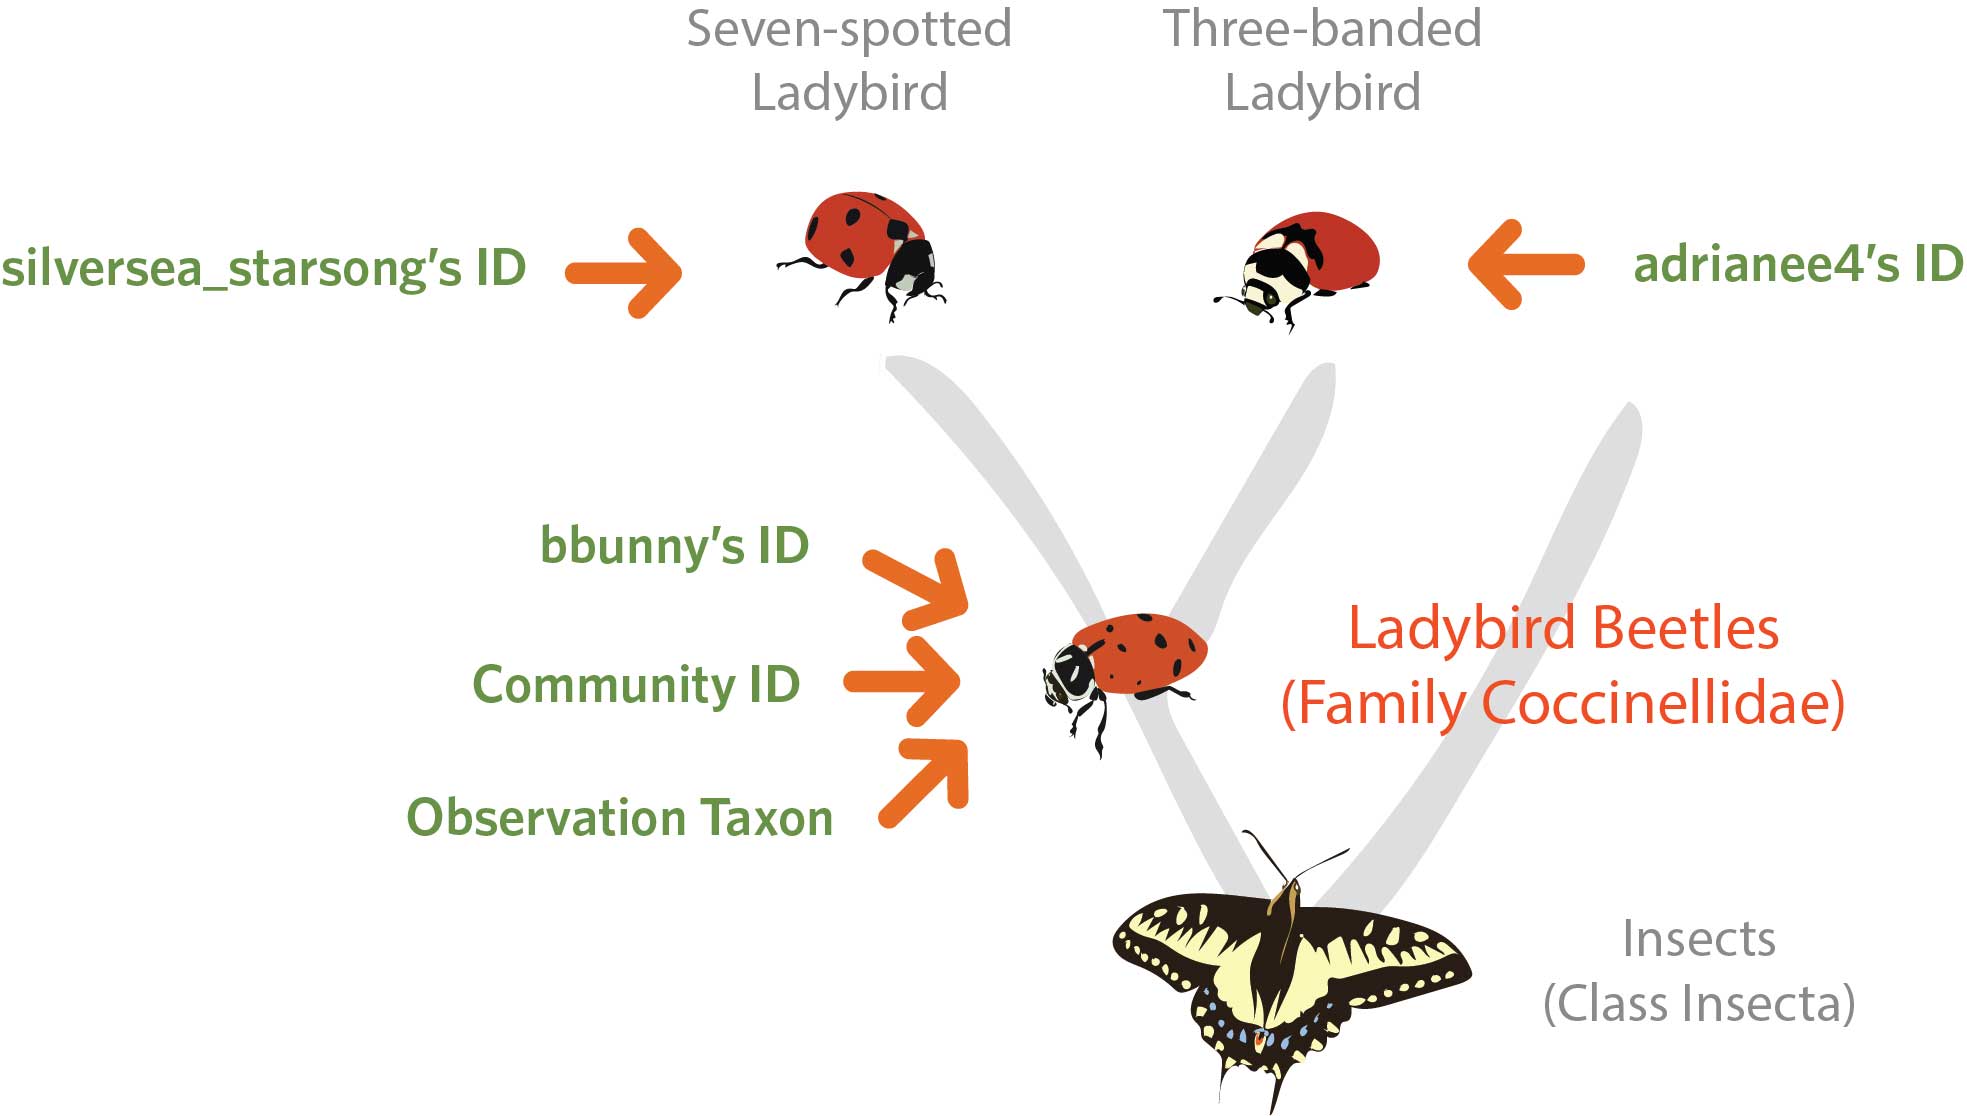 A visualization of a decision tree, with 'insects' at the bottom, and several ladybird species on top